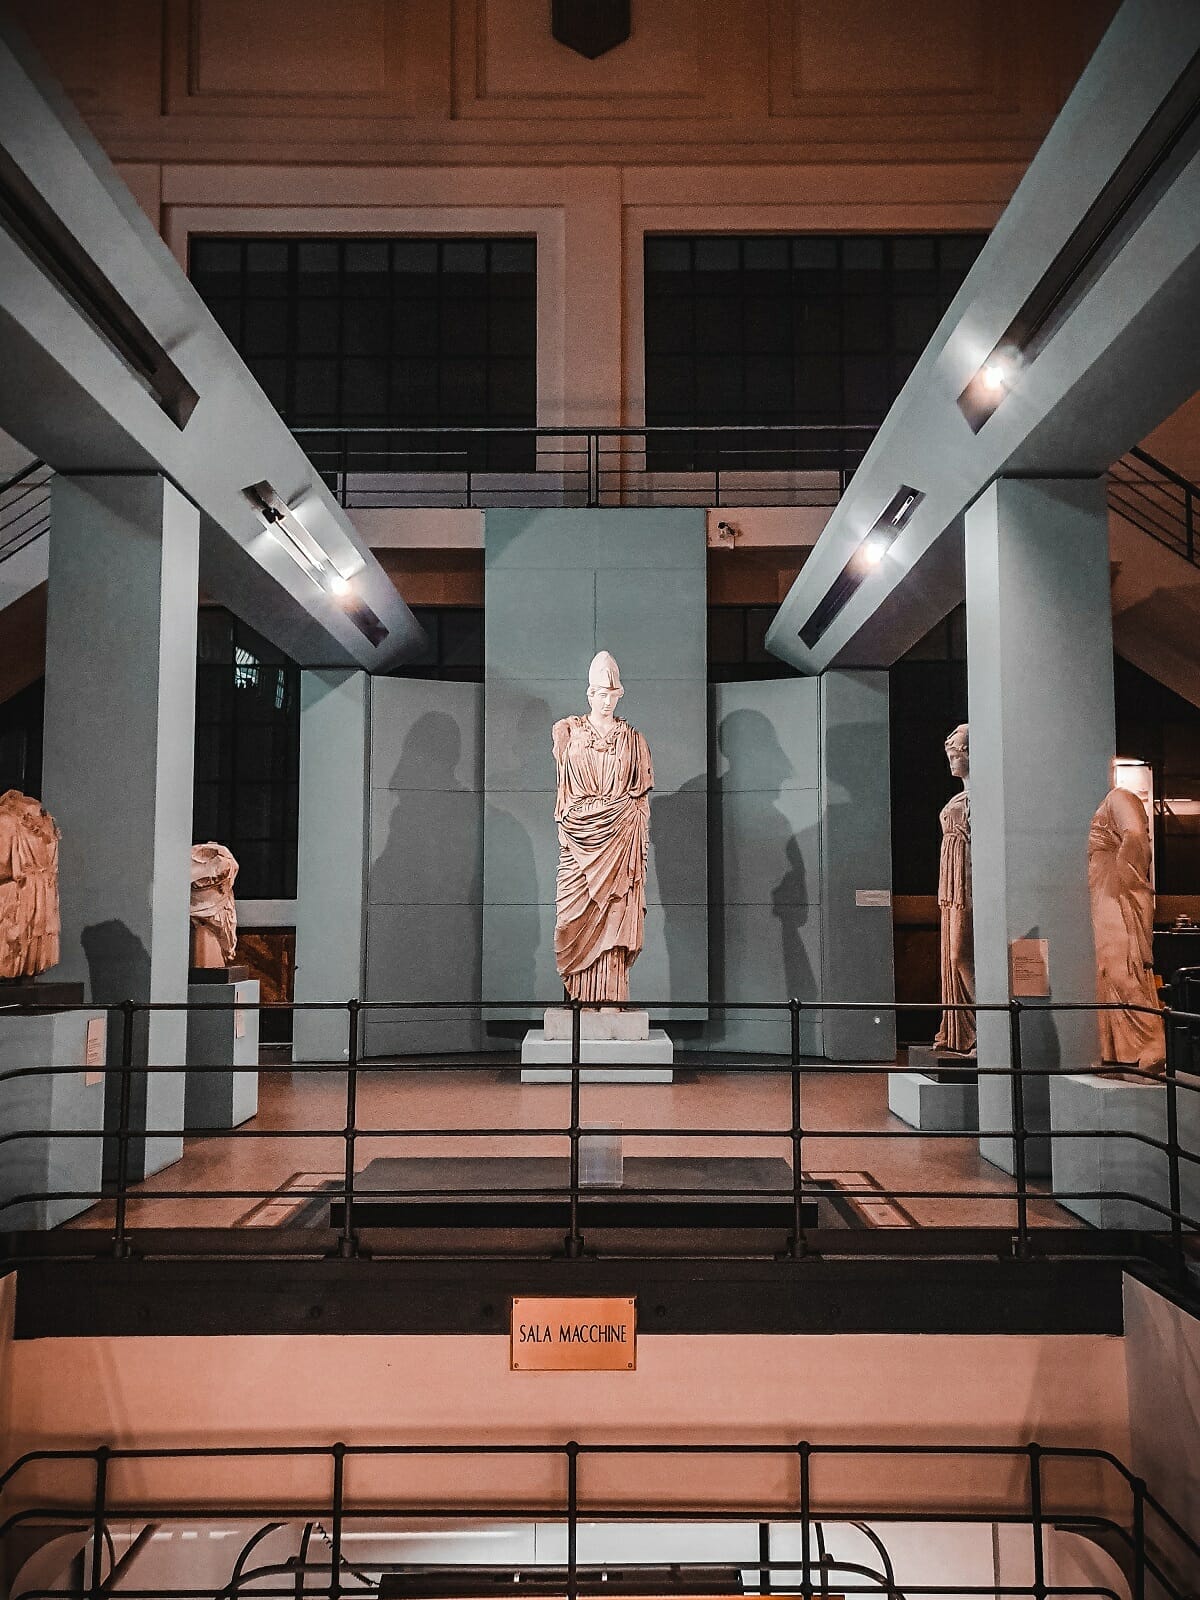 Statues at the Centrale Montemartini museum in Rome.